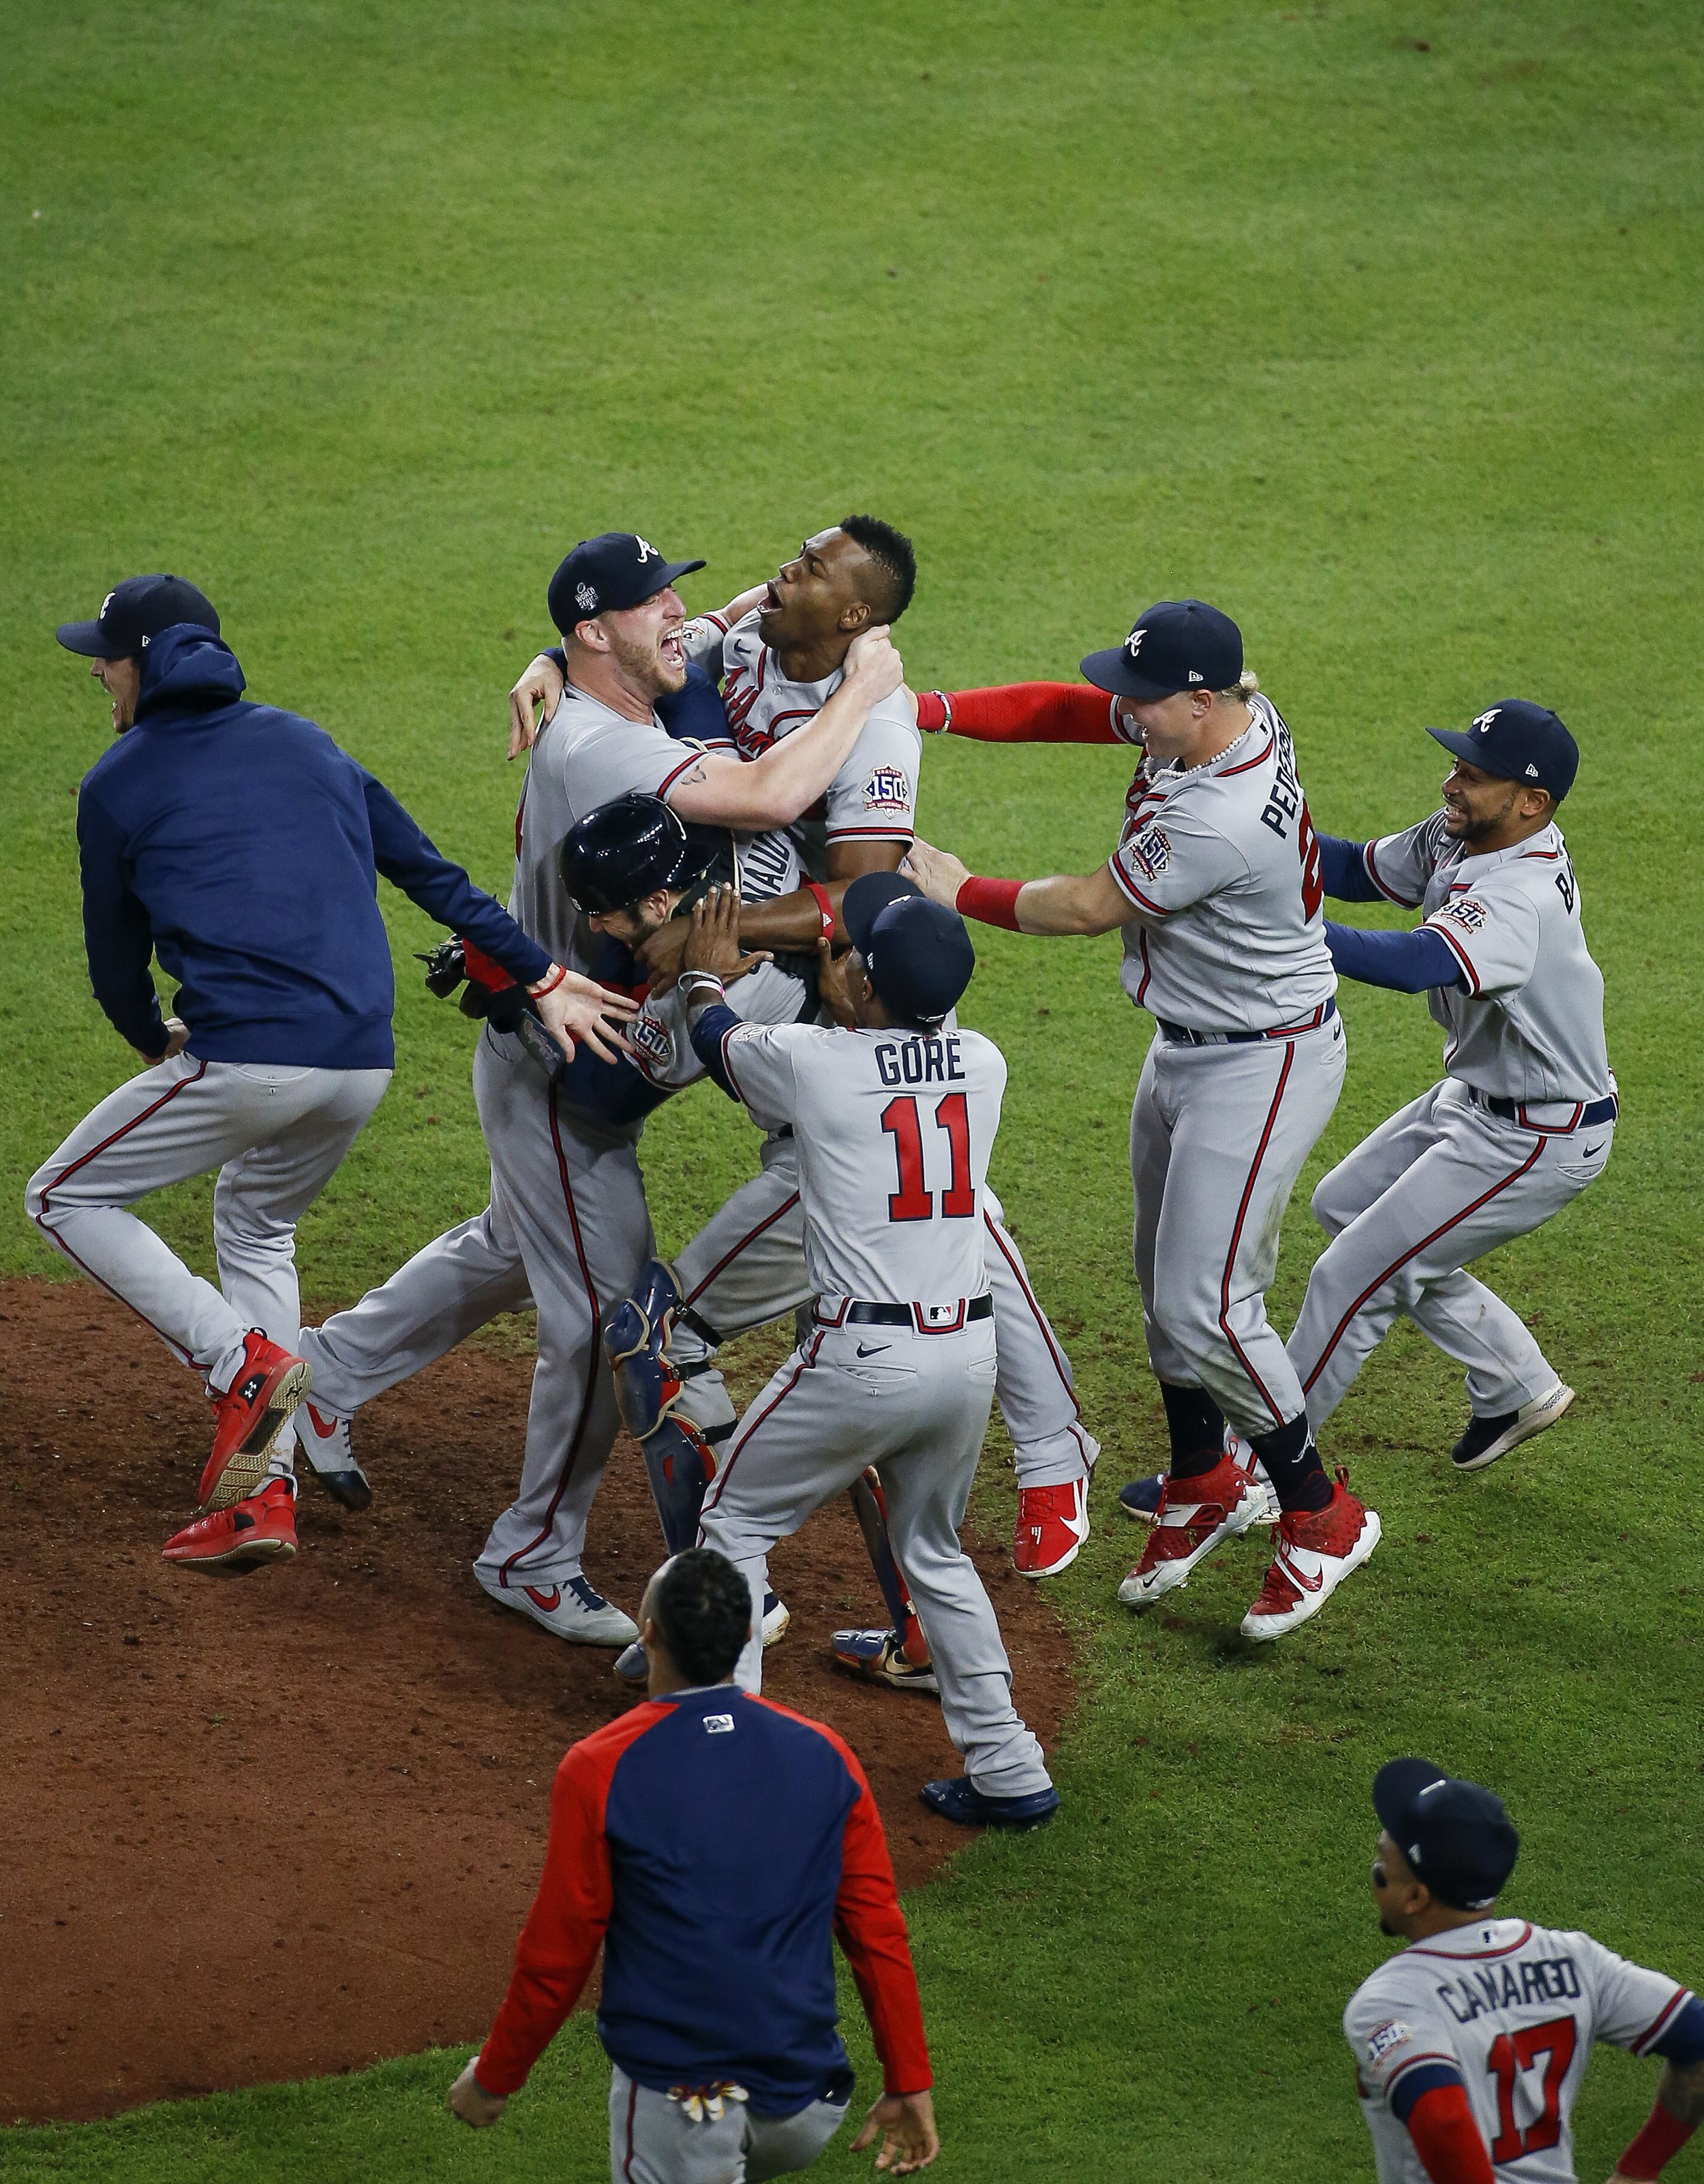  Atlanta Braves players celebrate near the mound after winning the World Series by defeating the Houston Astros 7-0 at Minute Maid Park on Tuesday, Nov. 2, 2021, in Houston. 